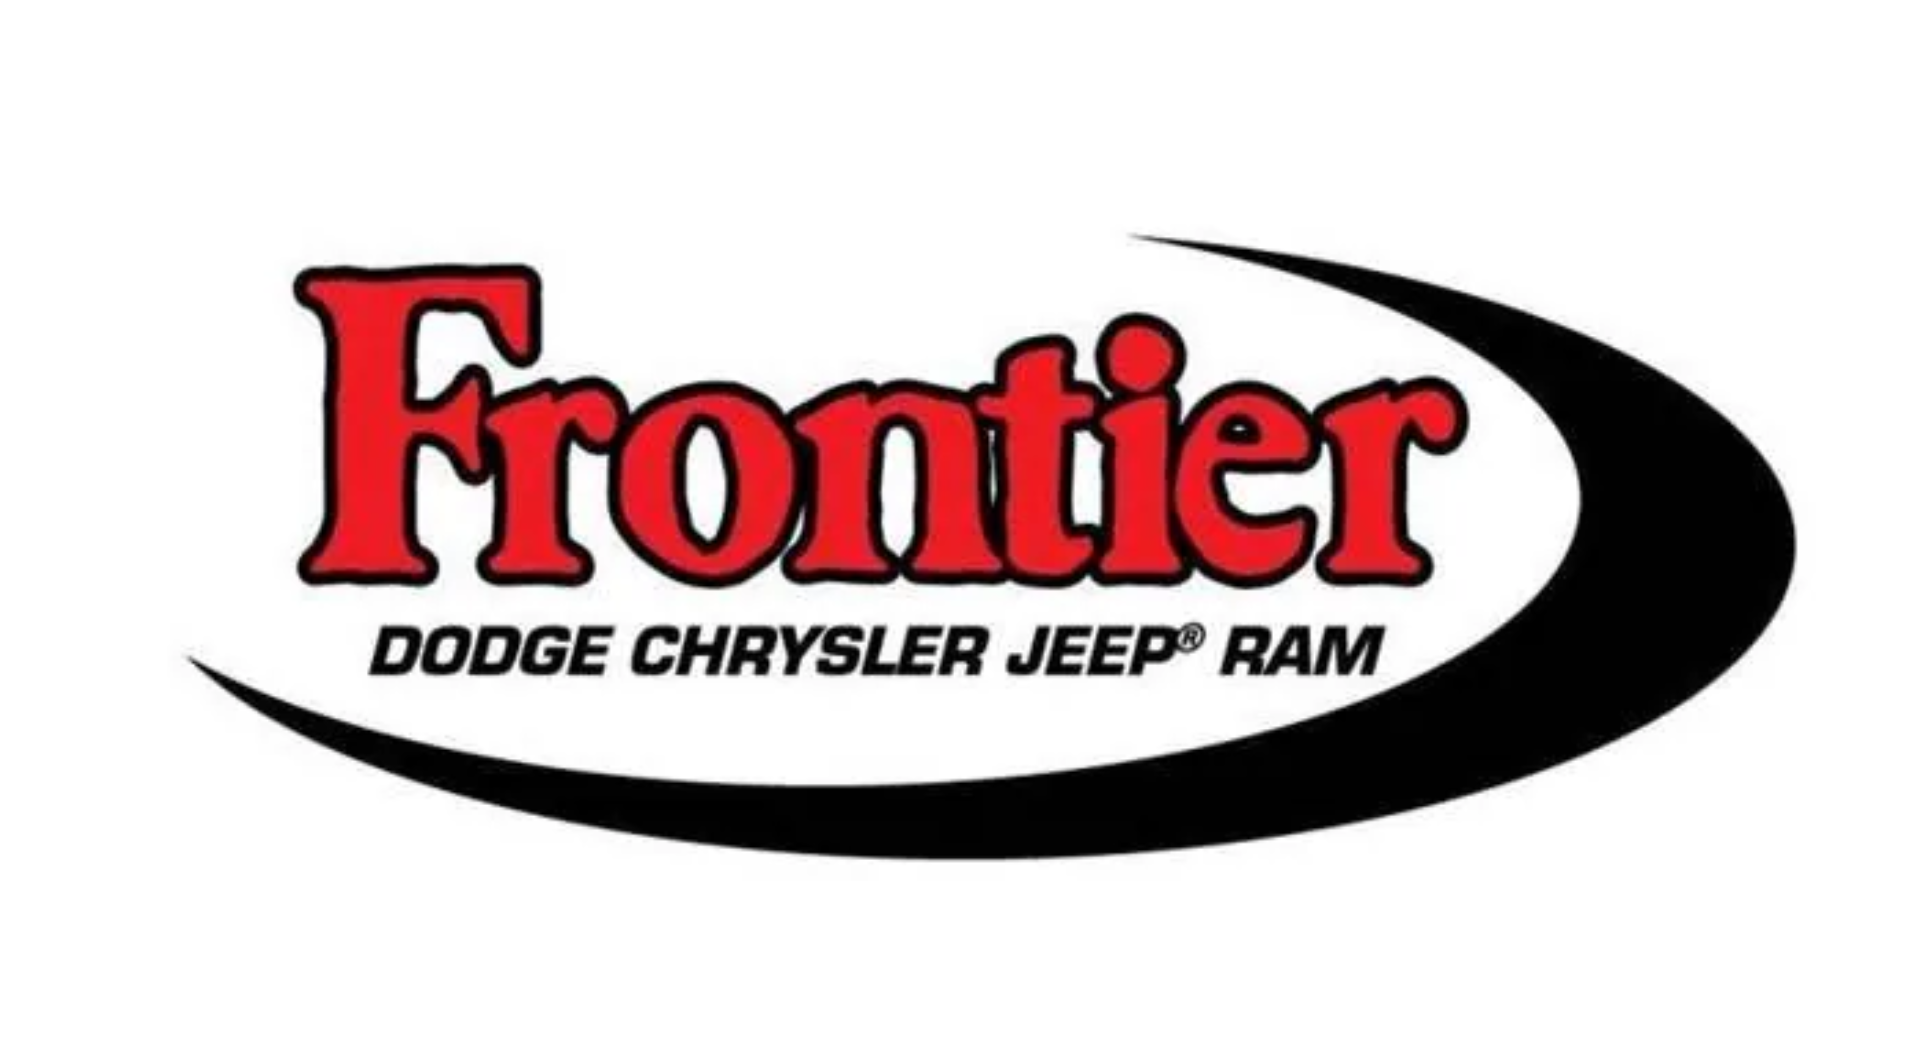 Frontier CDJR is a Certified Agriculture Dealership.